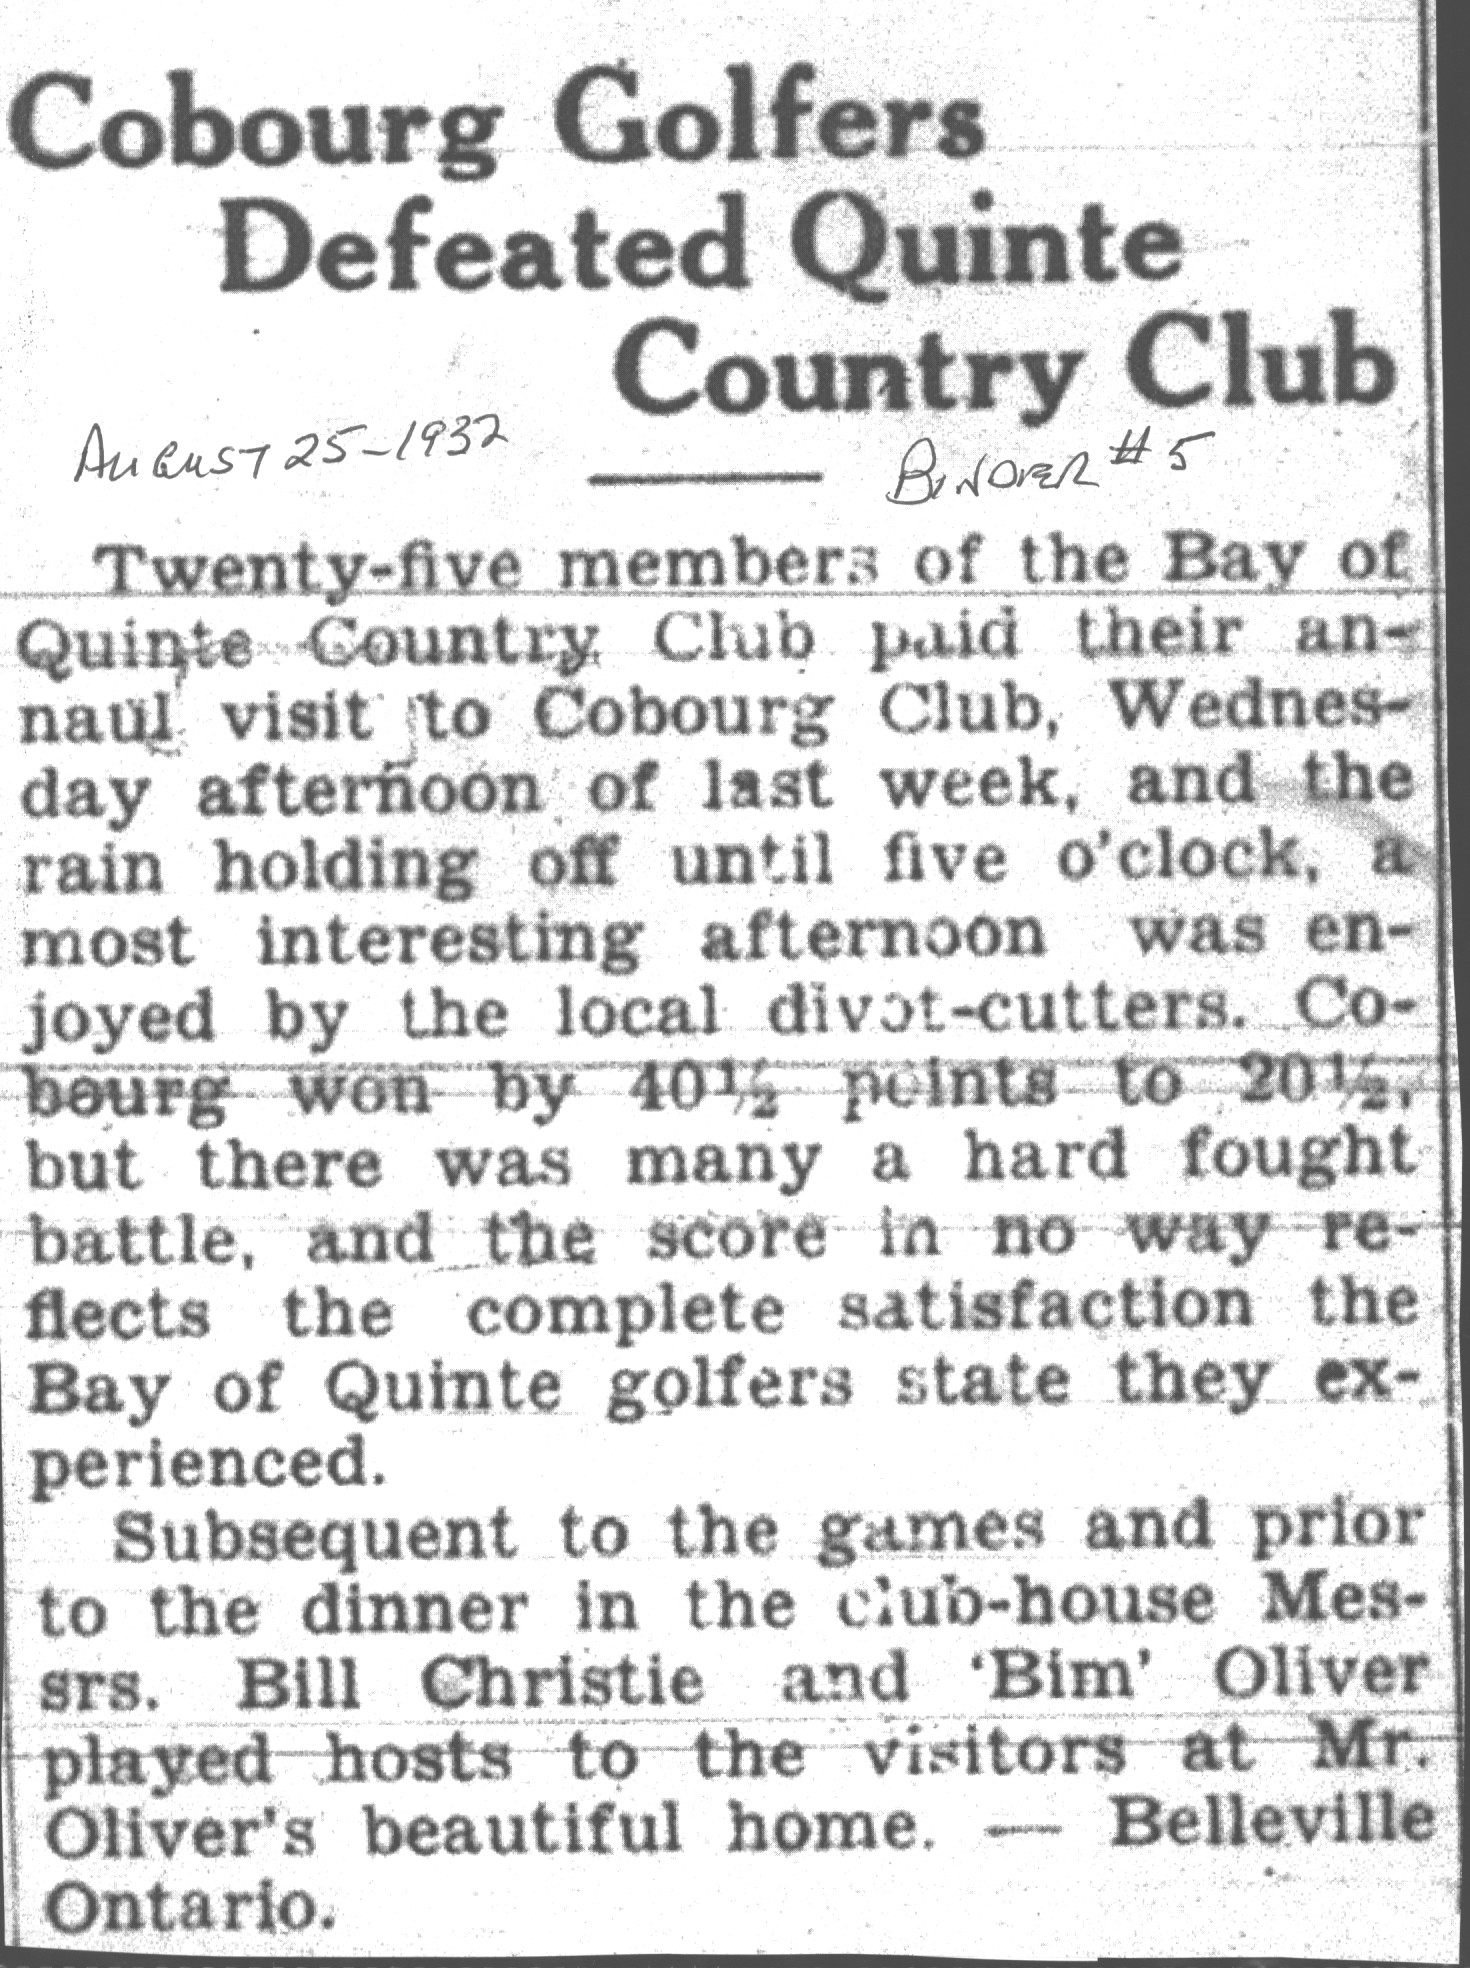 1932-08-25 Golf -Bay of Quinte Club at Cobourg